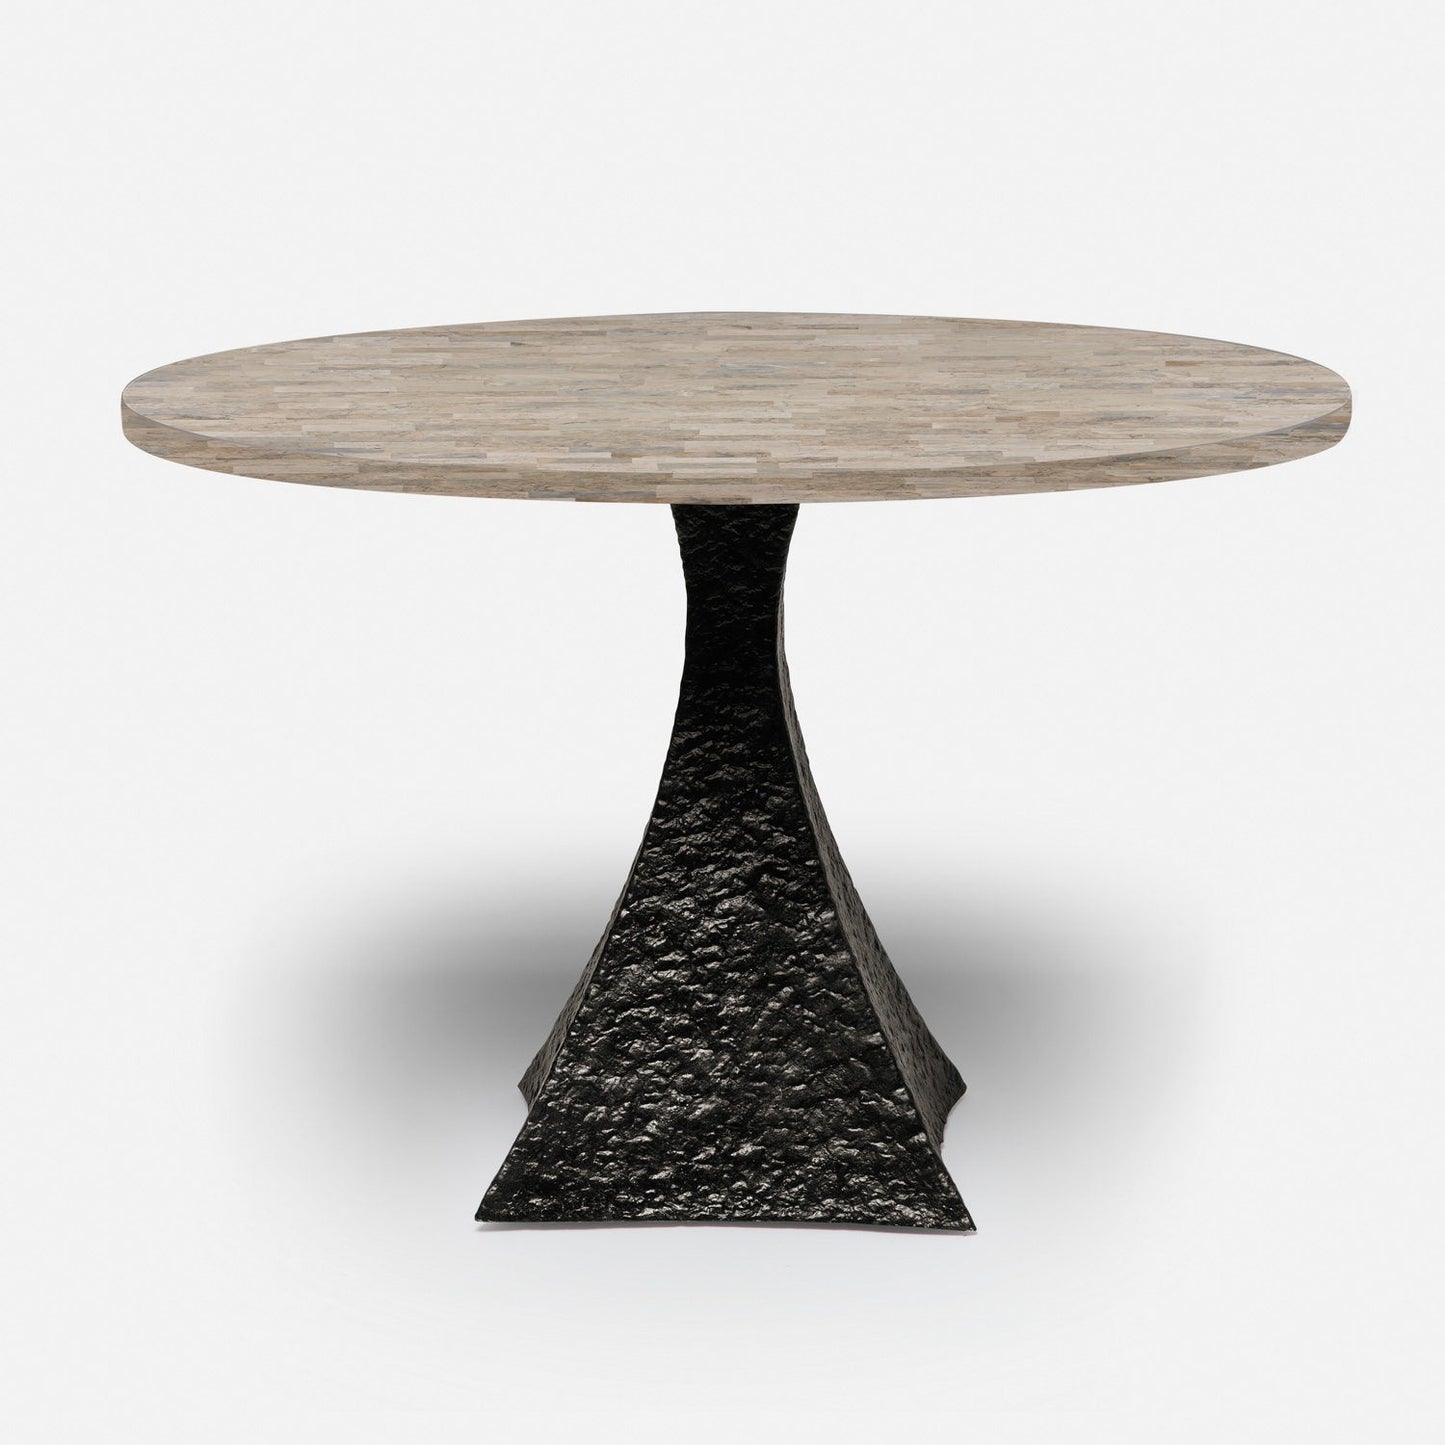 Made Goods Noor 48" x 30" Bumpy Black Iron Dinning Table With Round Warm Gray Marble Table Top